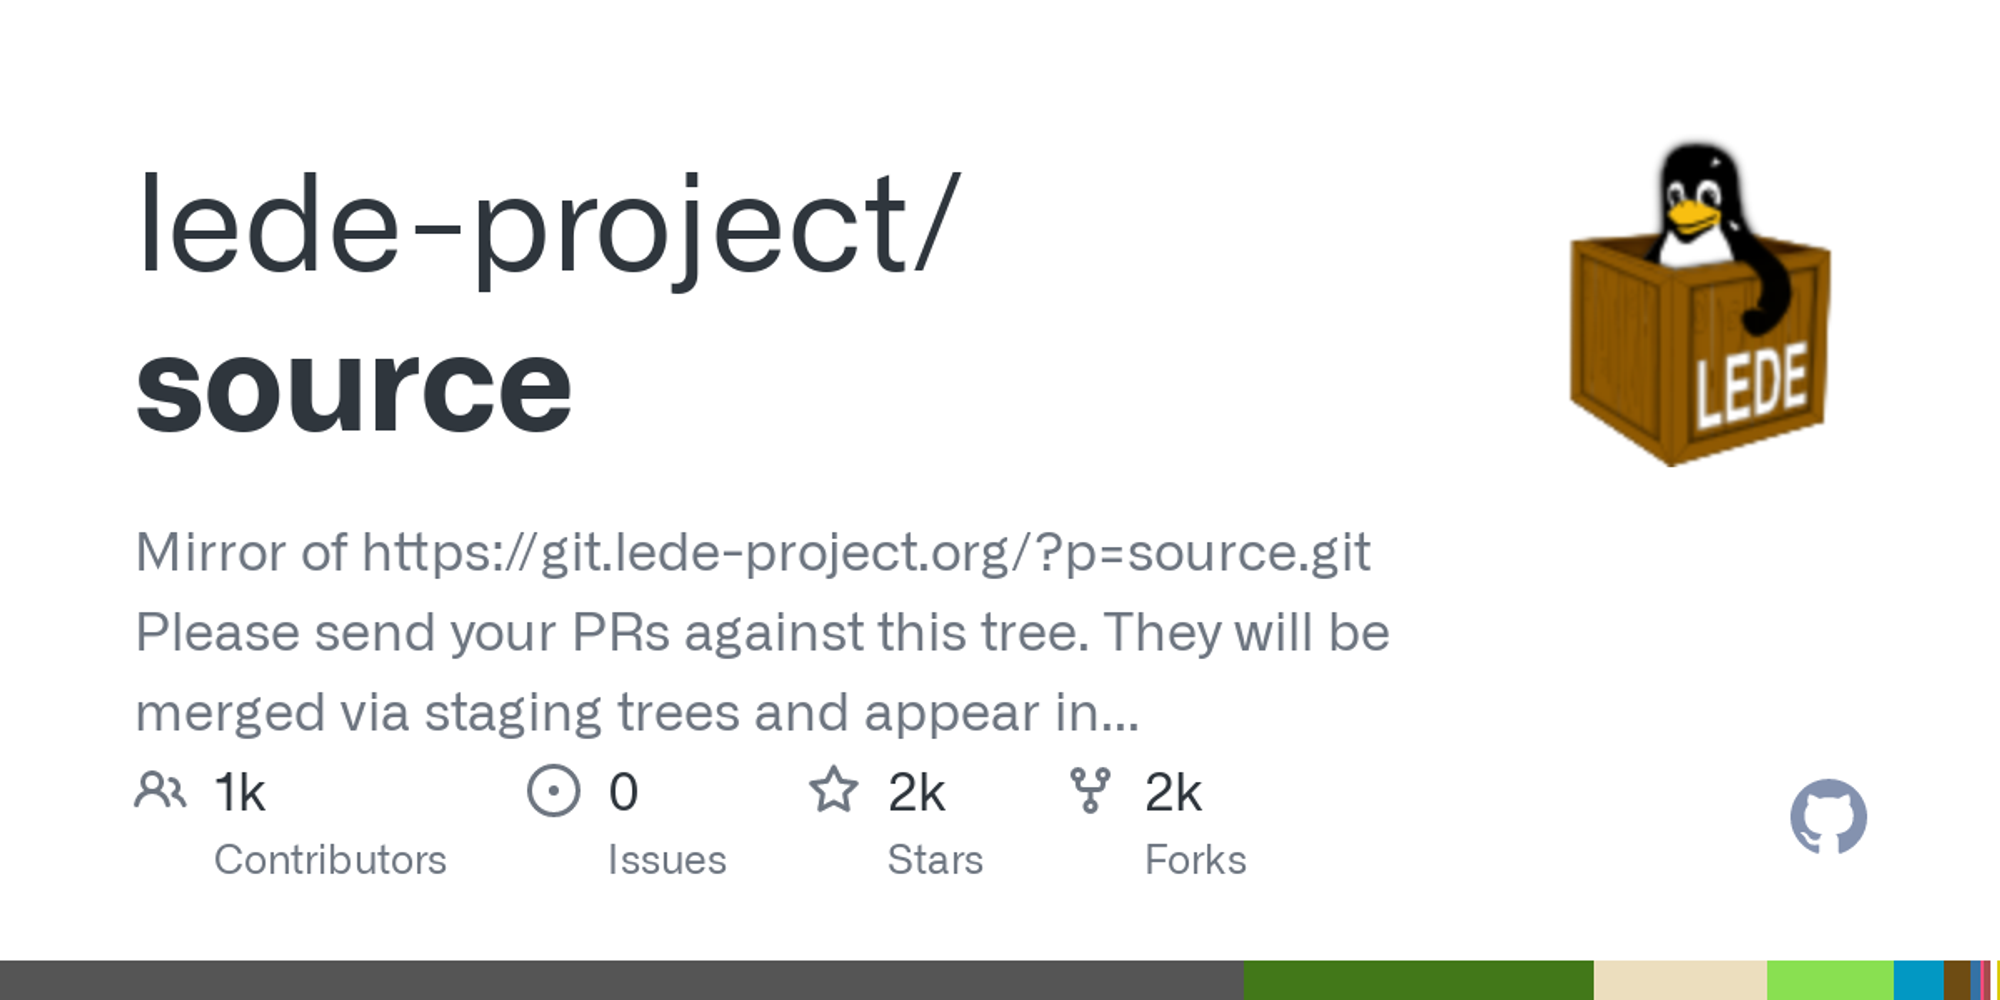 GitHub - lede-project/source: Mirror of https://git.lede-project.org/?p=source.git Please send your PRs against this tree. They will be merged via staging trees and appear in this tree once the staging trees get merged back into source.git